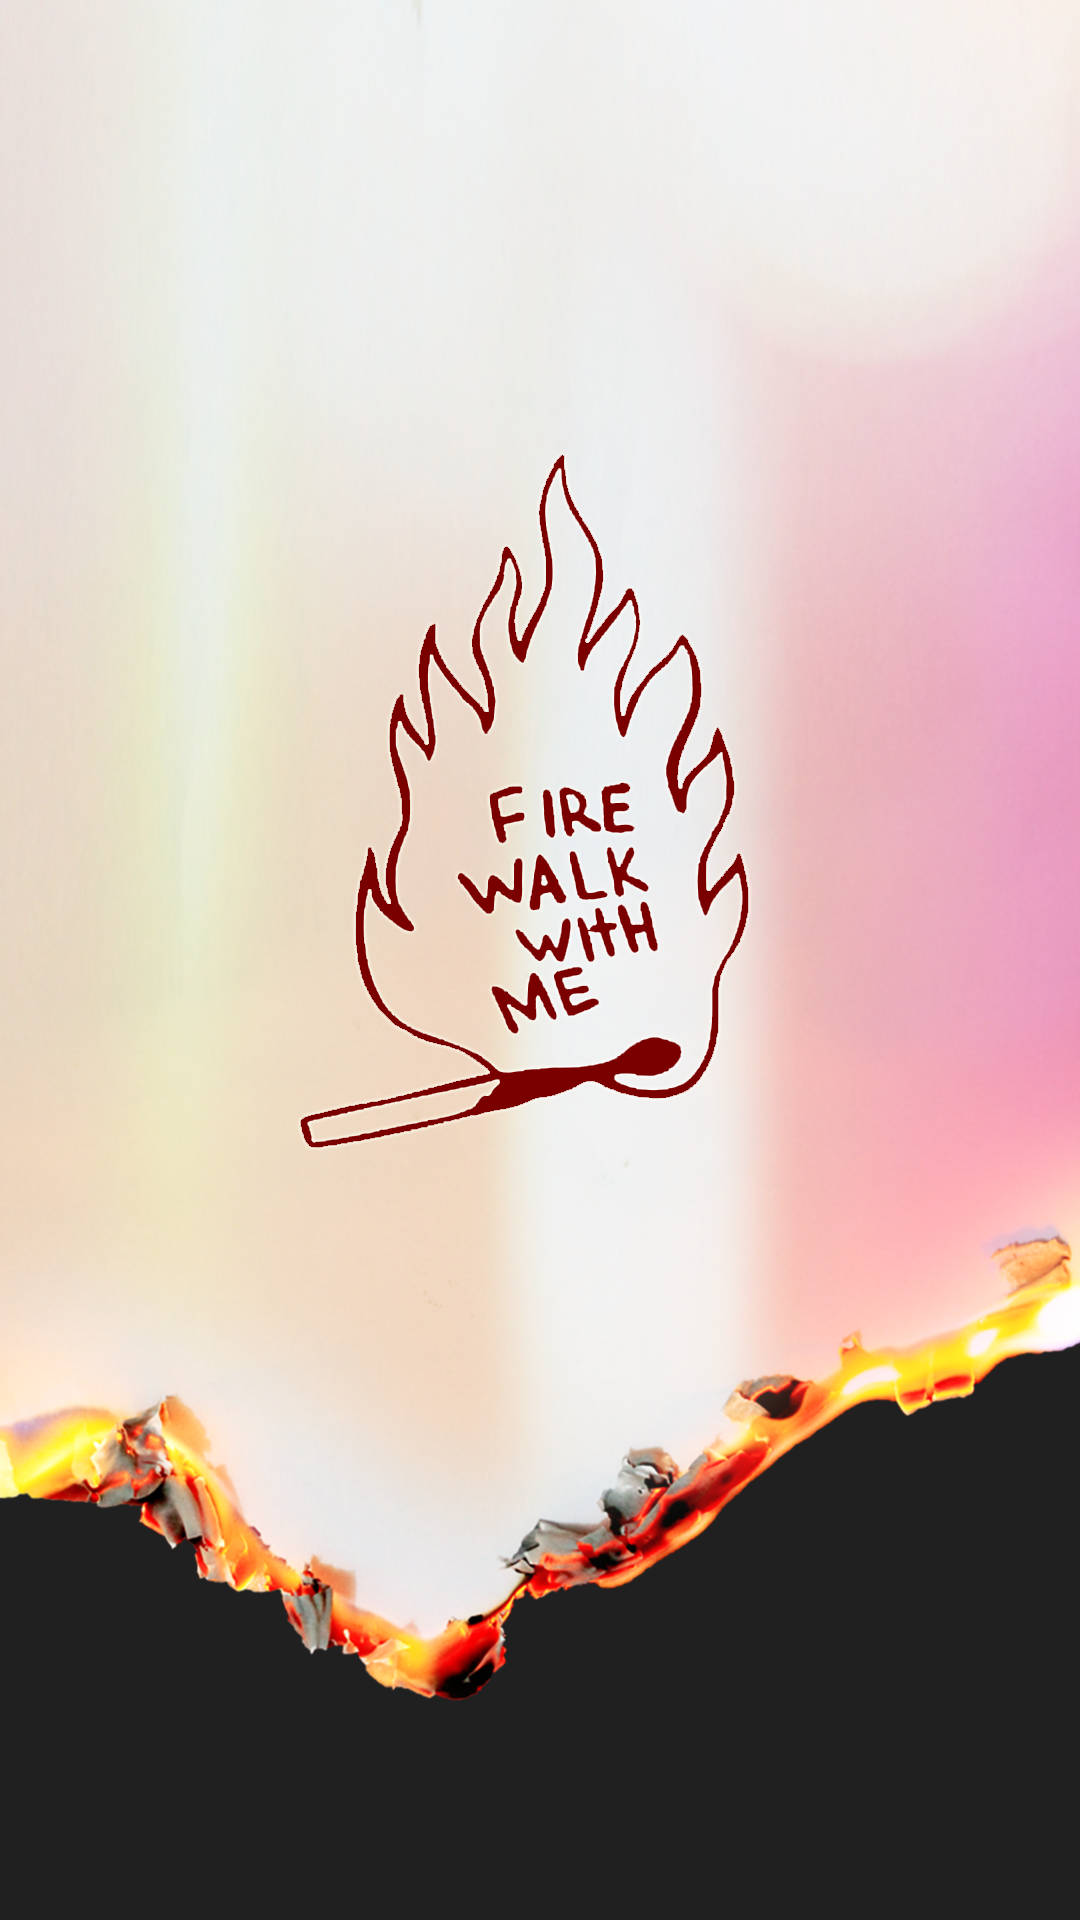 Fire Walk Me - Ad Background